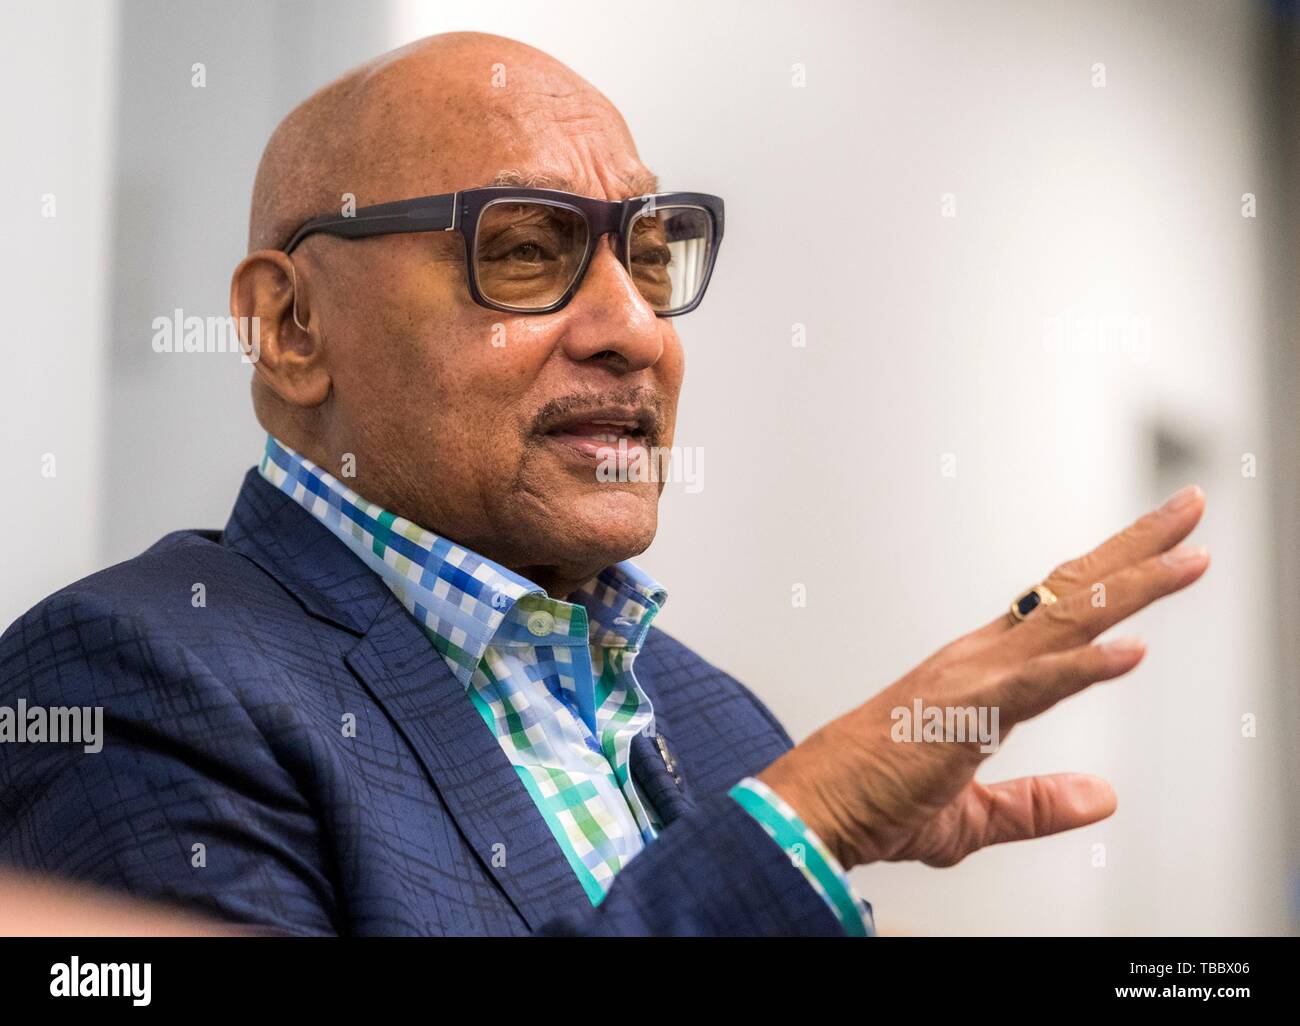 Duke Fakir, founding member of The Four Tops, discusses music as activism and social expression during the Summit on Race in America at the LBJ Presidential Library April 10, 2019 in Austin, Texas. Stock Photo